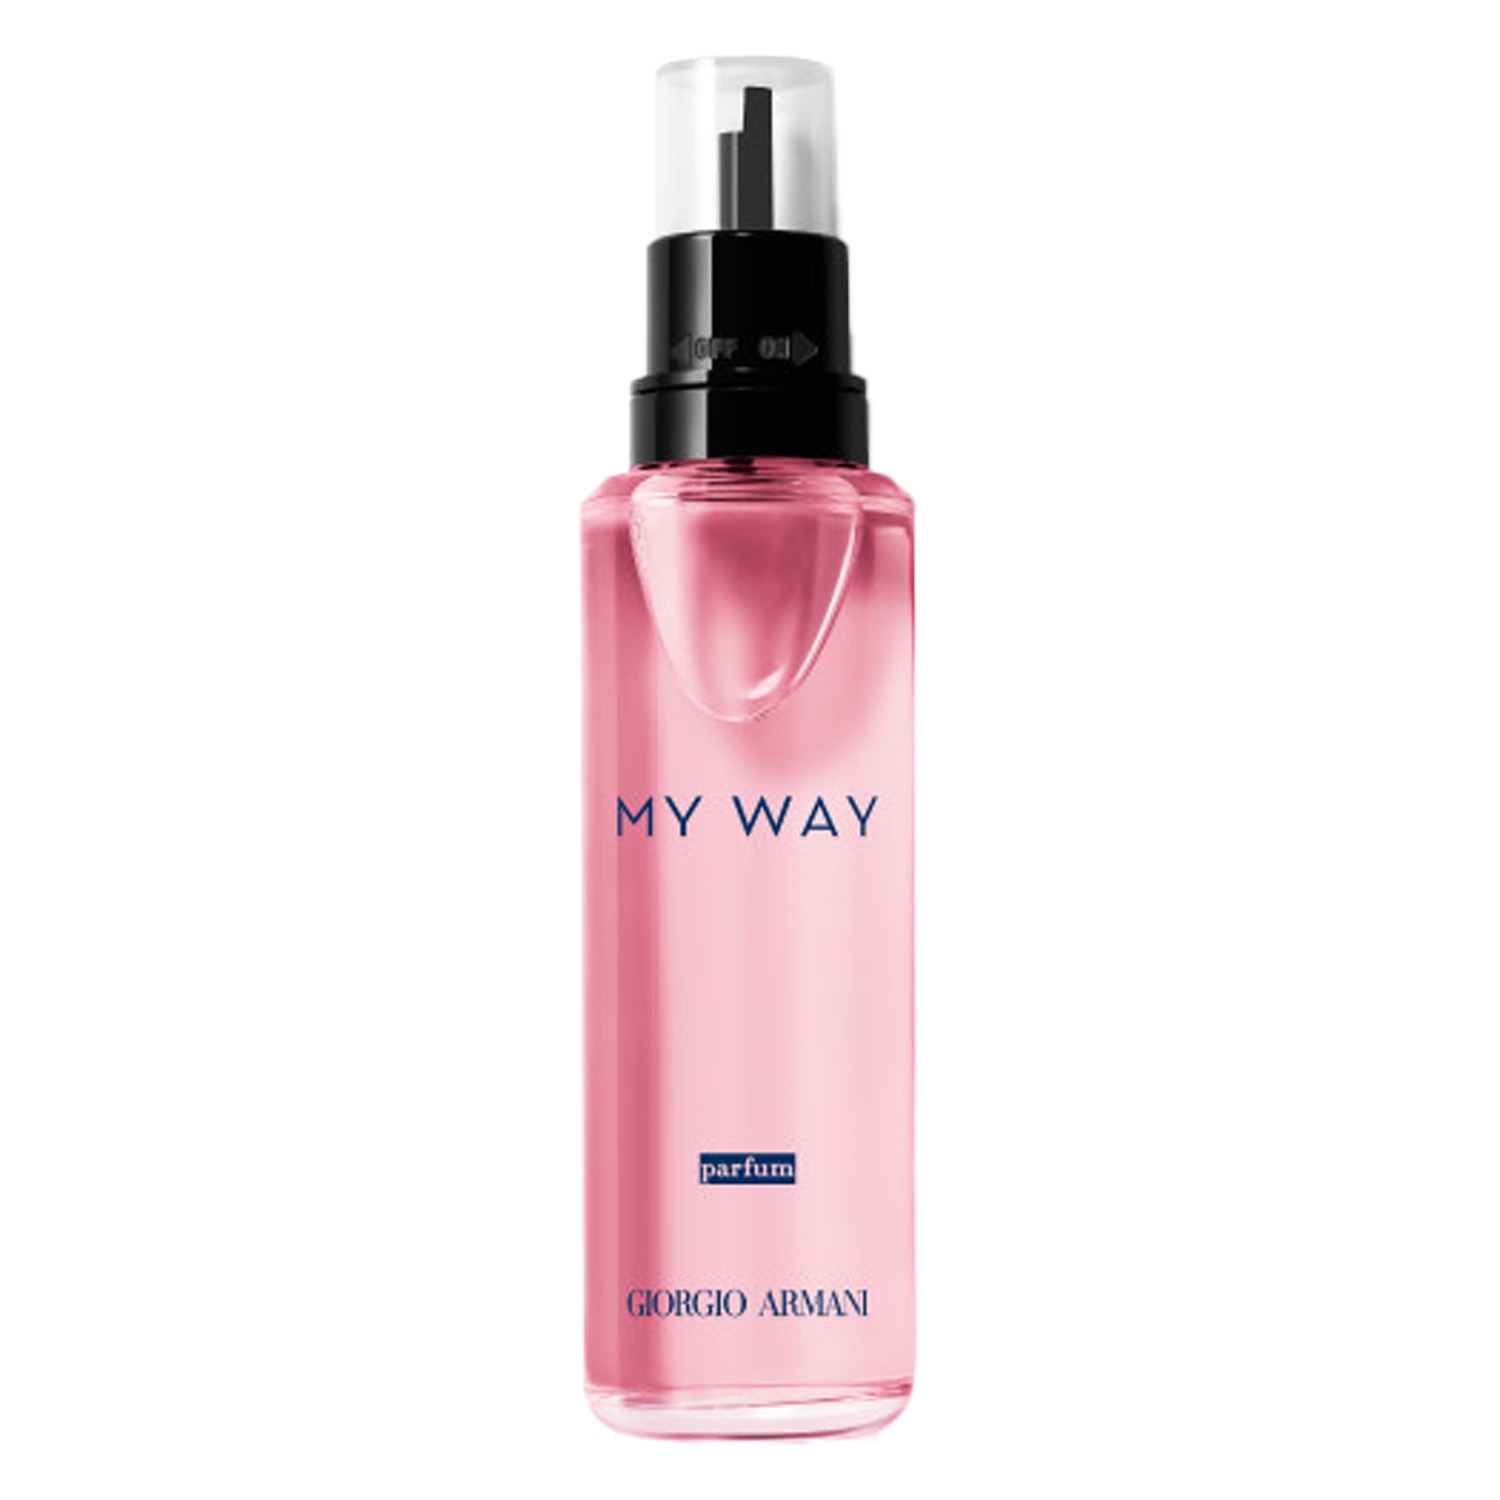 Product image from MY WAY - Parfum Refill